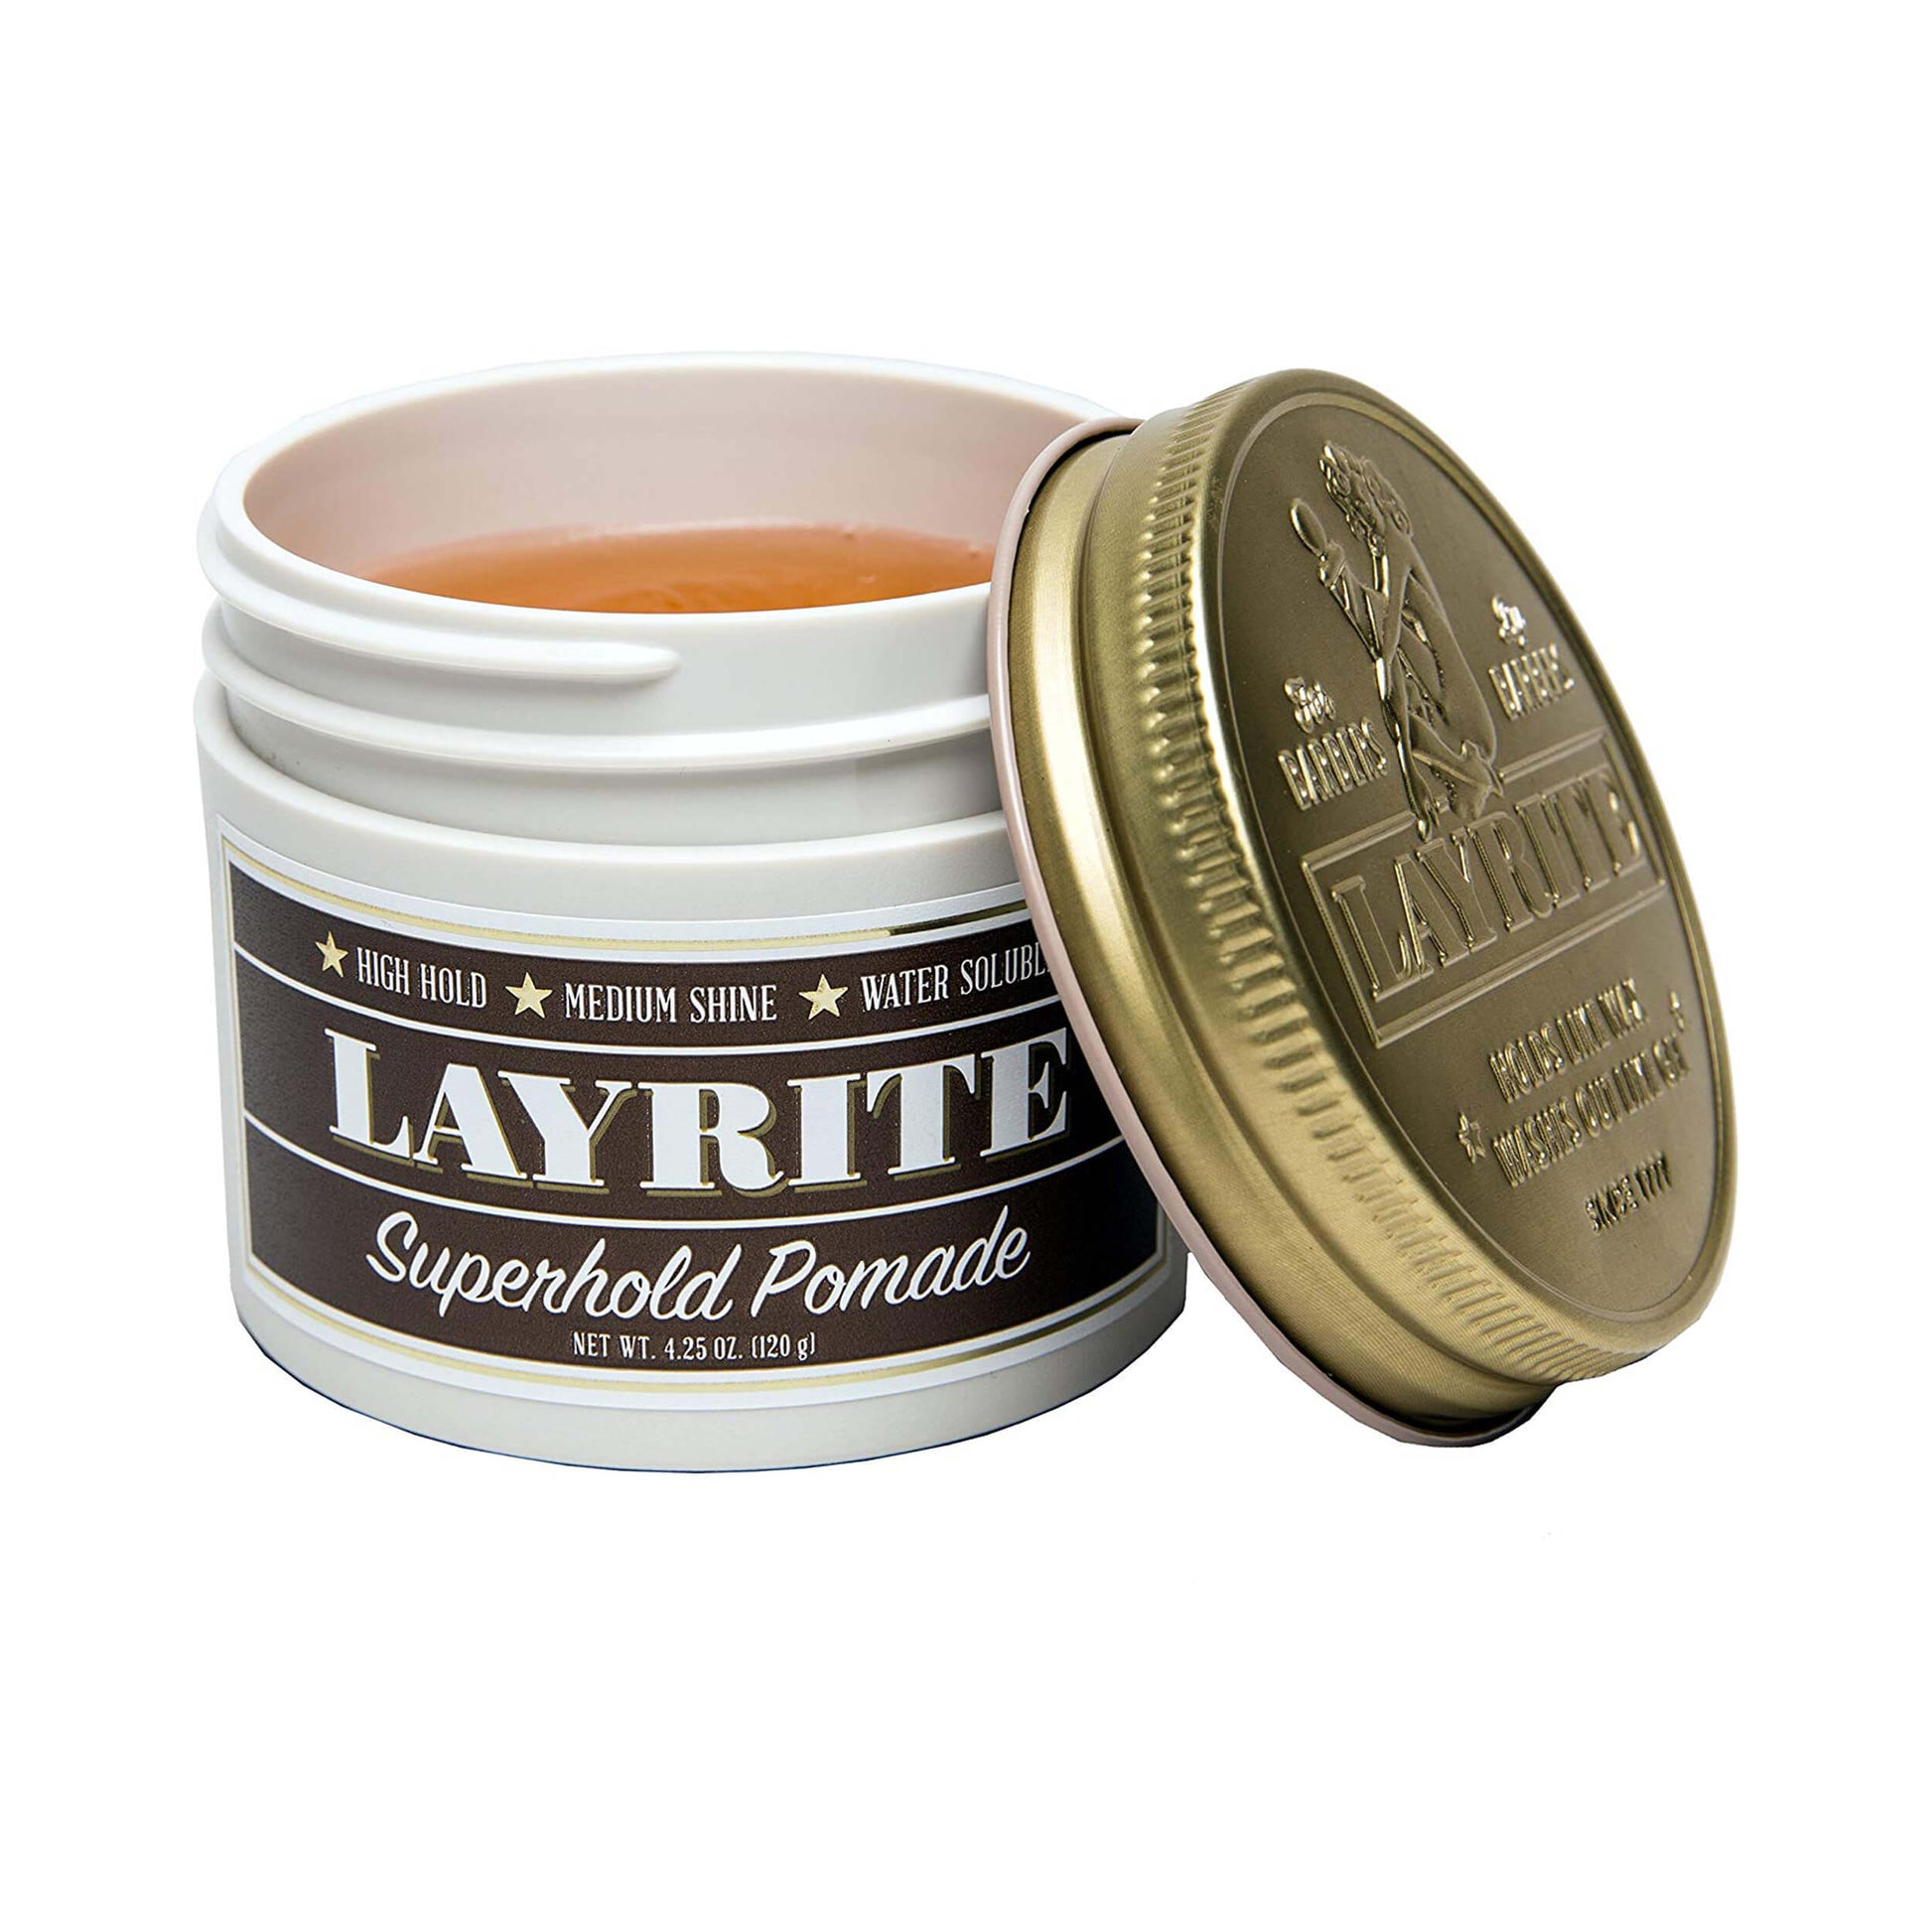 Layrite Superhold Pomade 120g Open